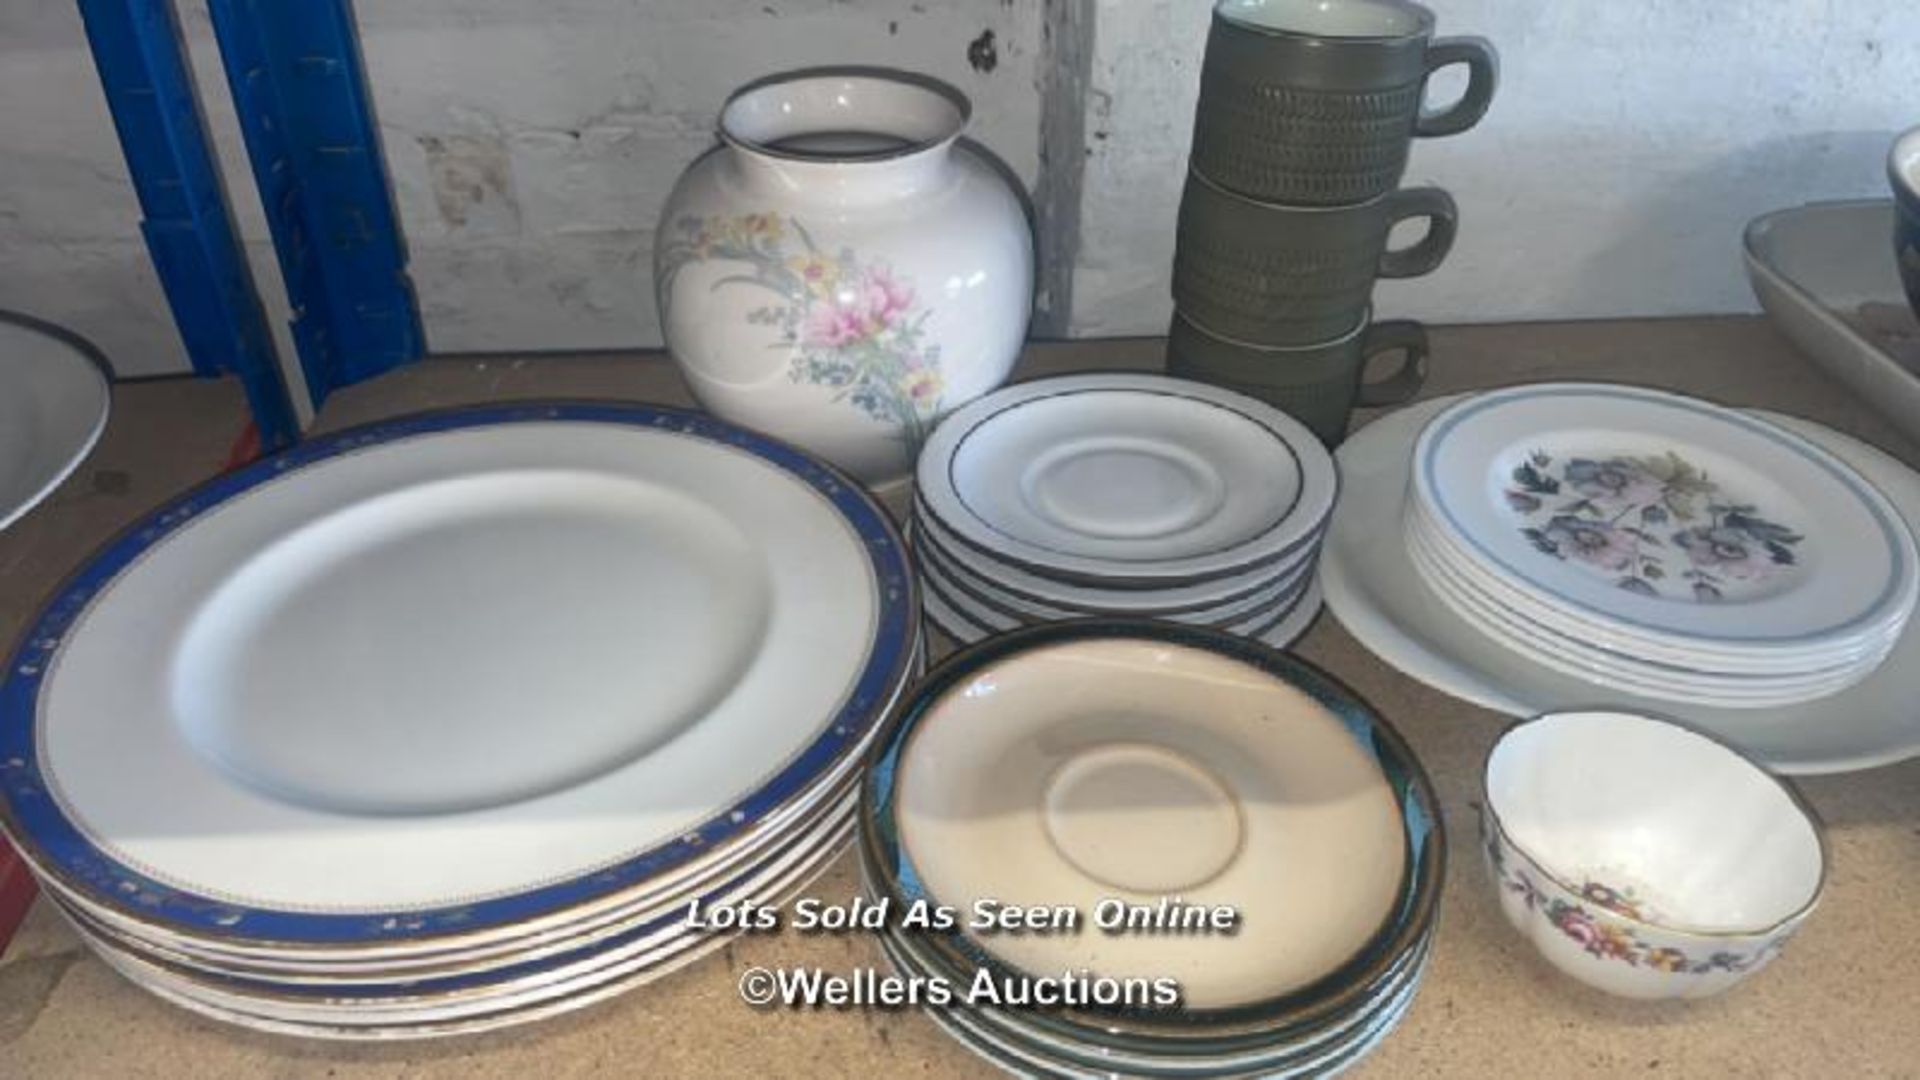 LARGE ASSORTMENT OF TABLEWARE INCLUDING DENBY STONEWARE, ROYAL DOULTON AND STUDIO POTTERY PLATE - Image 4 of 7